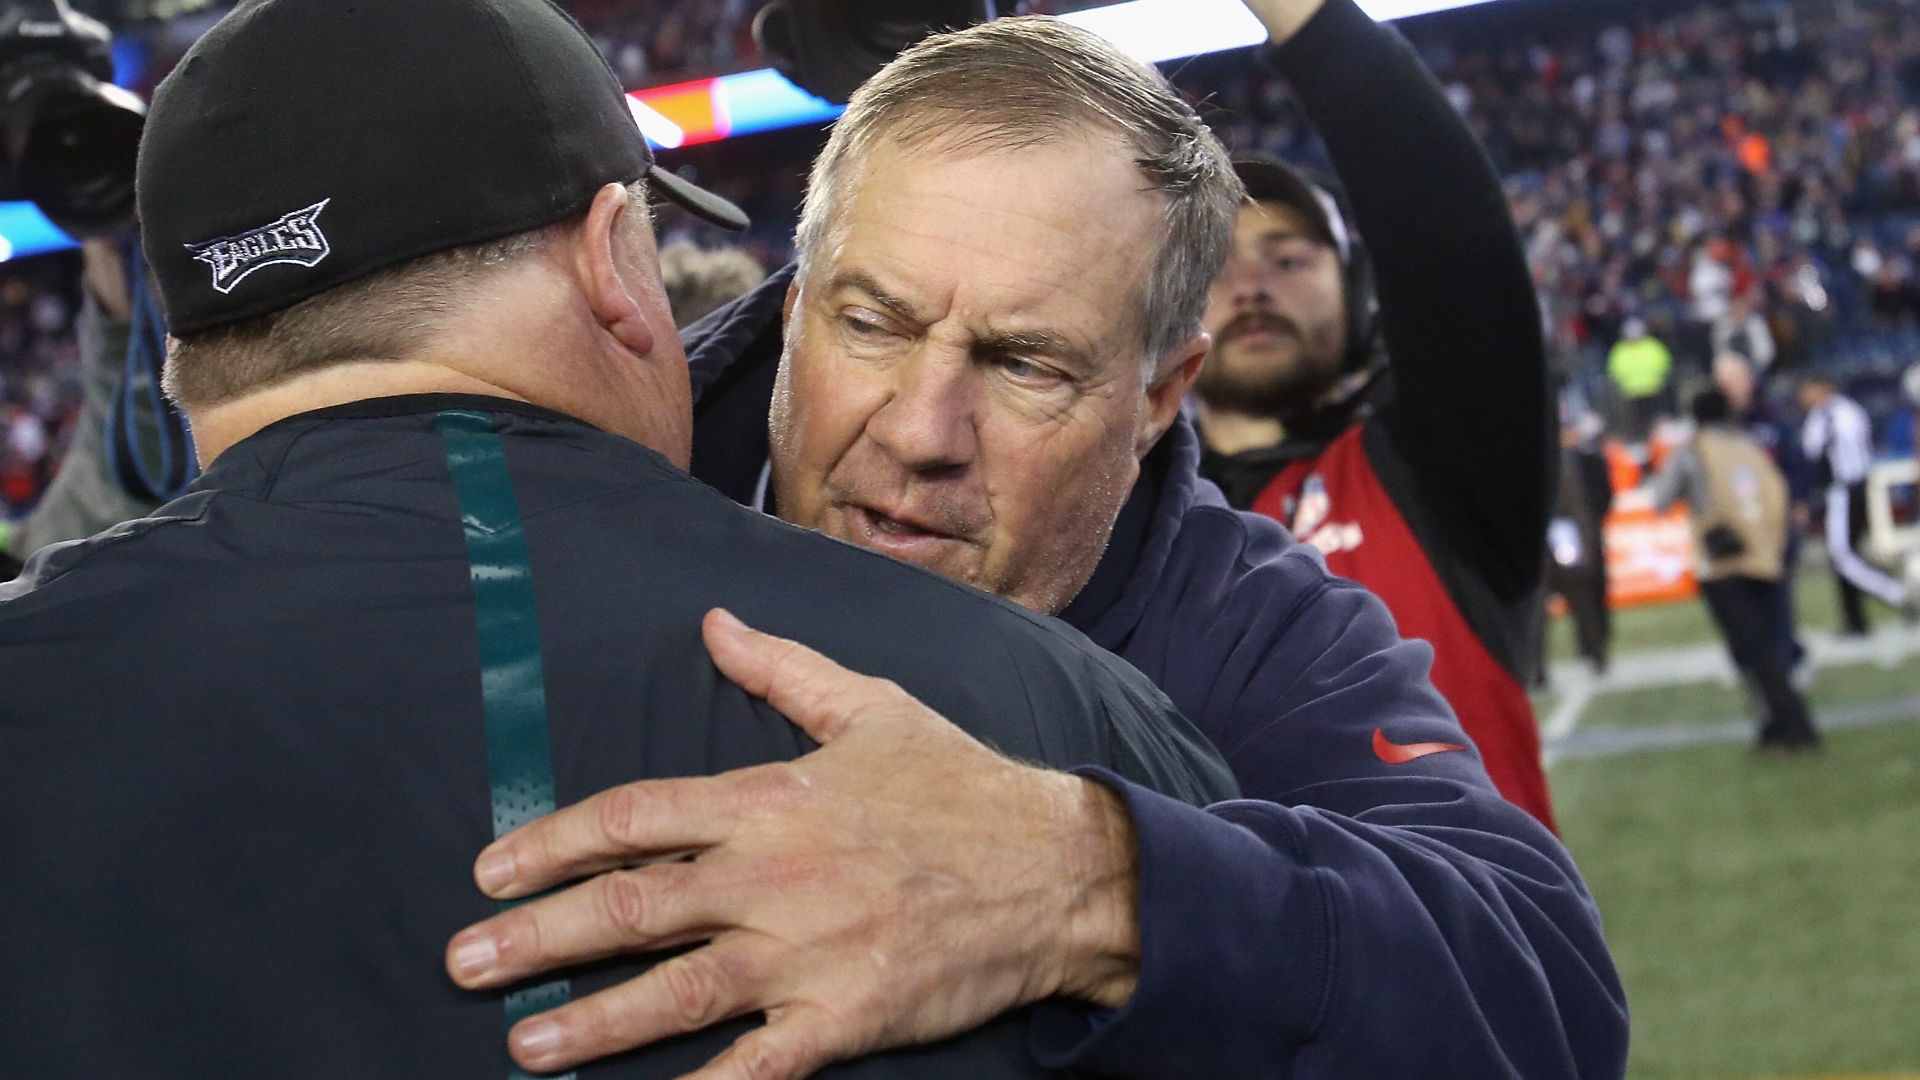 Bill Belichick disappointed by Chip Kelly firing: 'Tough to build a program in a year'